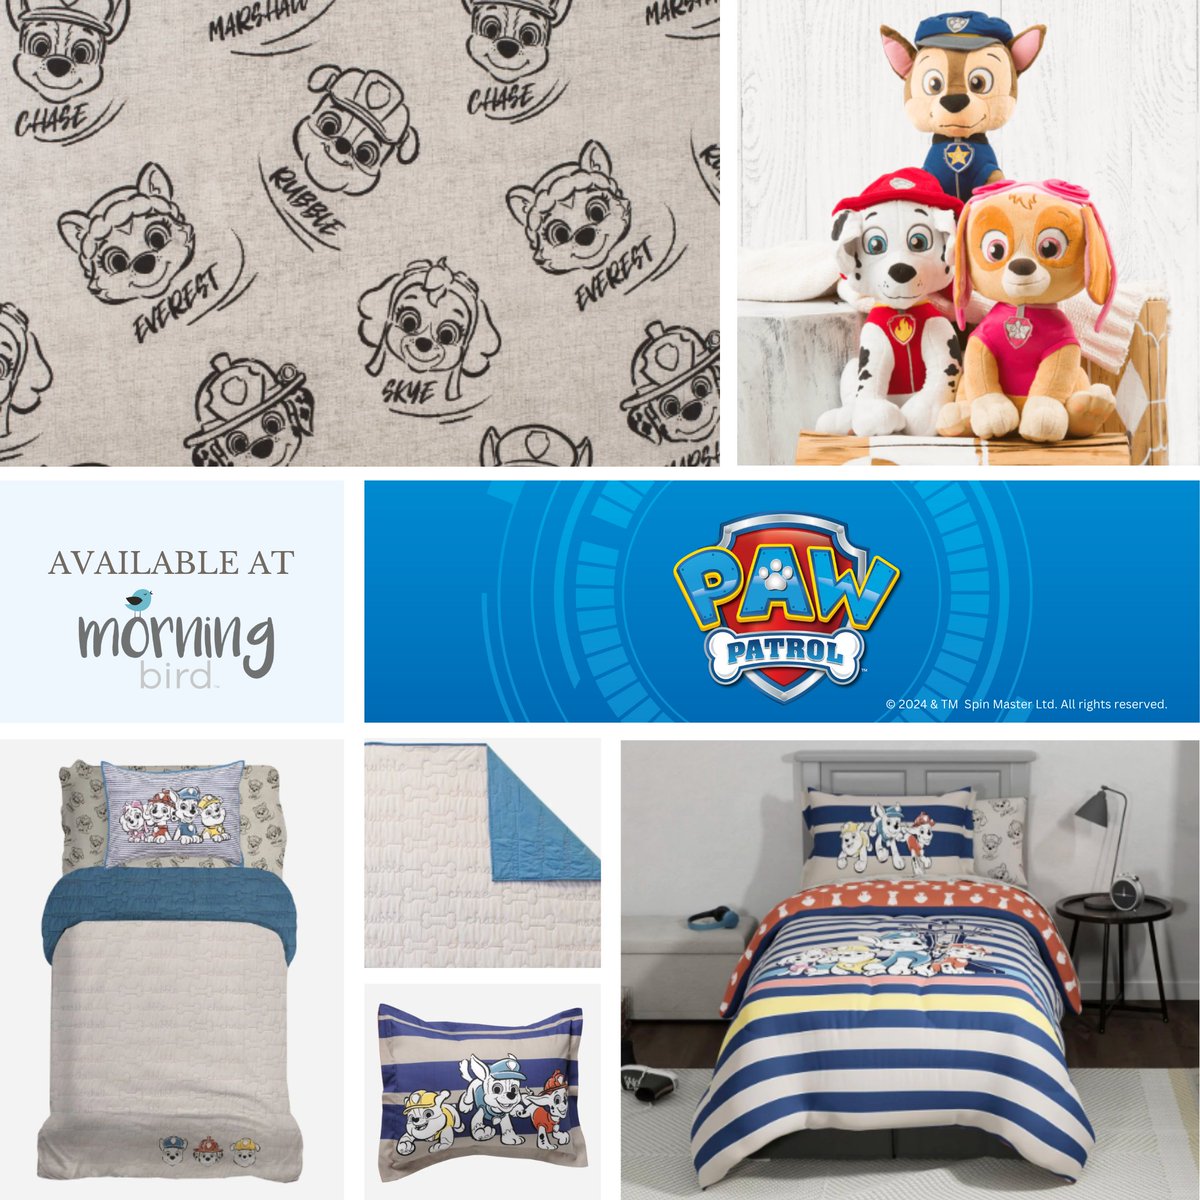 Happy National Puppy Day! Elevate your little one's sleep space with adventure! 🐾✨ Shop our PAW Patrol bedding collection for a paw-sitively delightful bedtime experience.

#PAWPatrol #bedding #MorningBird #Chase #kidsbedding #premiumbedding #characterbedding